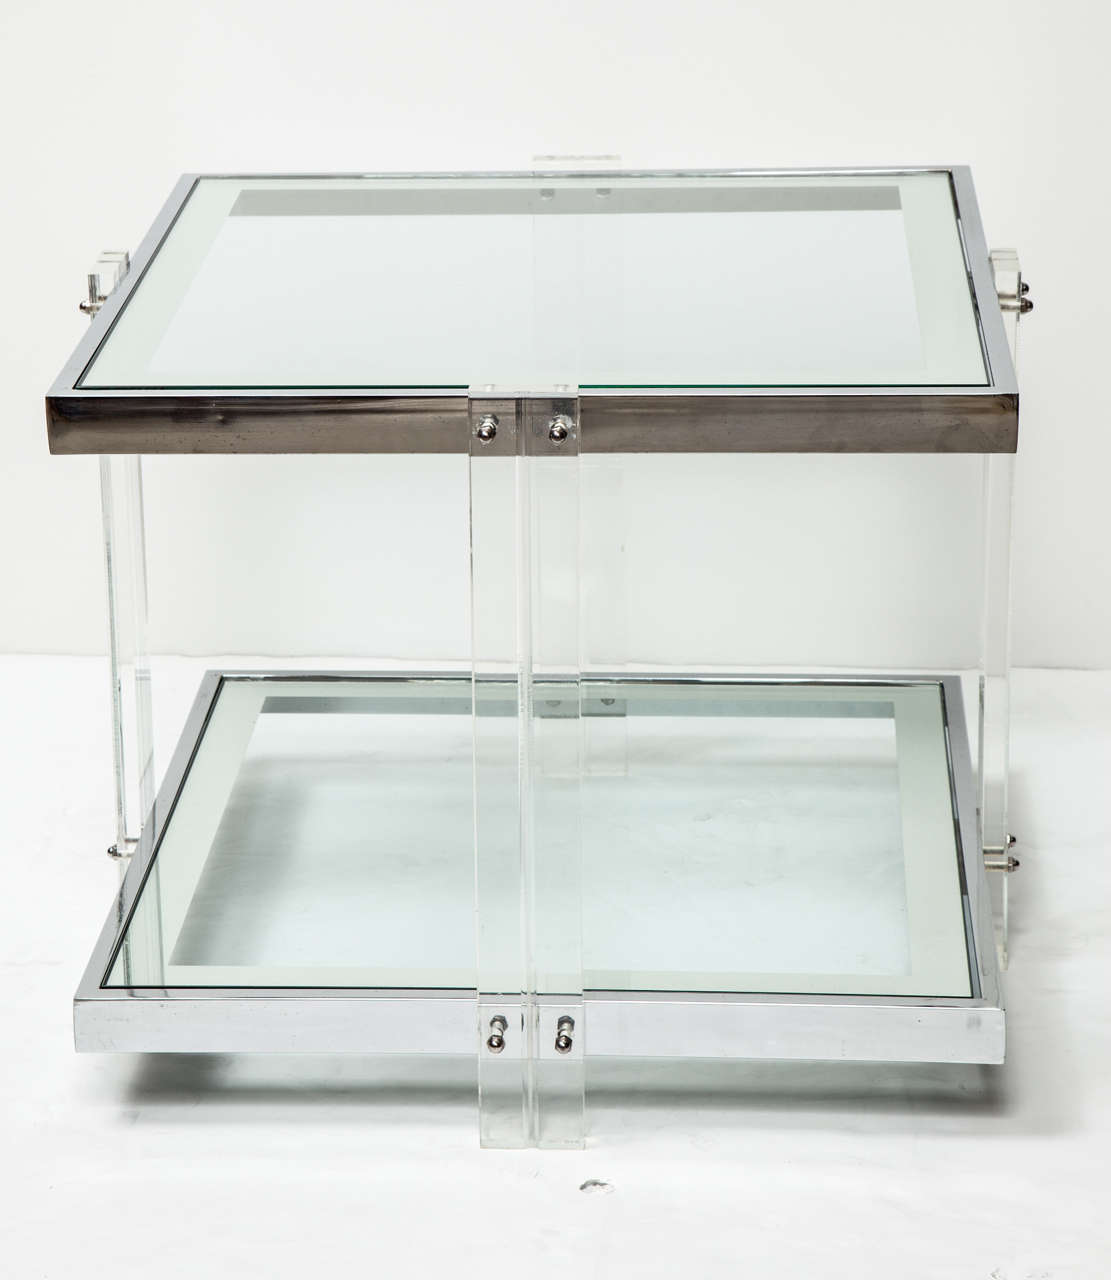 Decorative side table deigned of Lucite and chrome, circa 1960. Two glass shelves with silver borders.